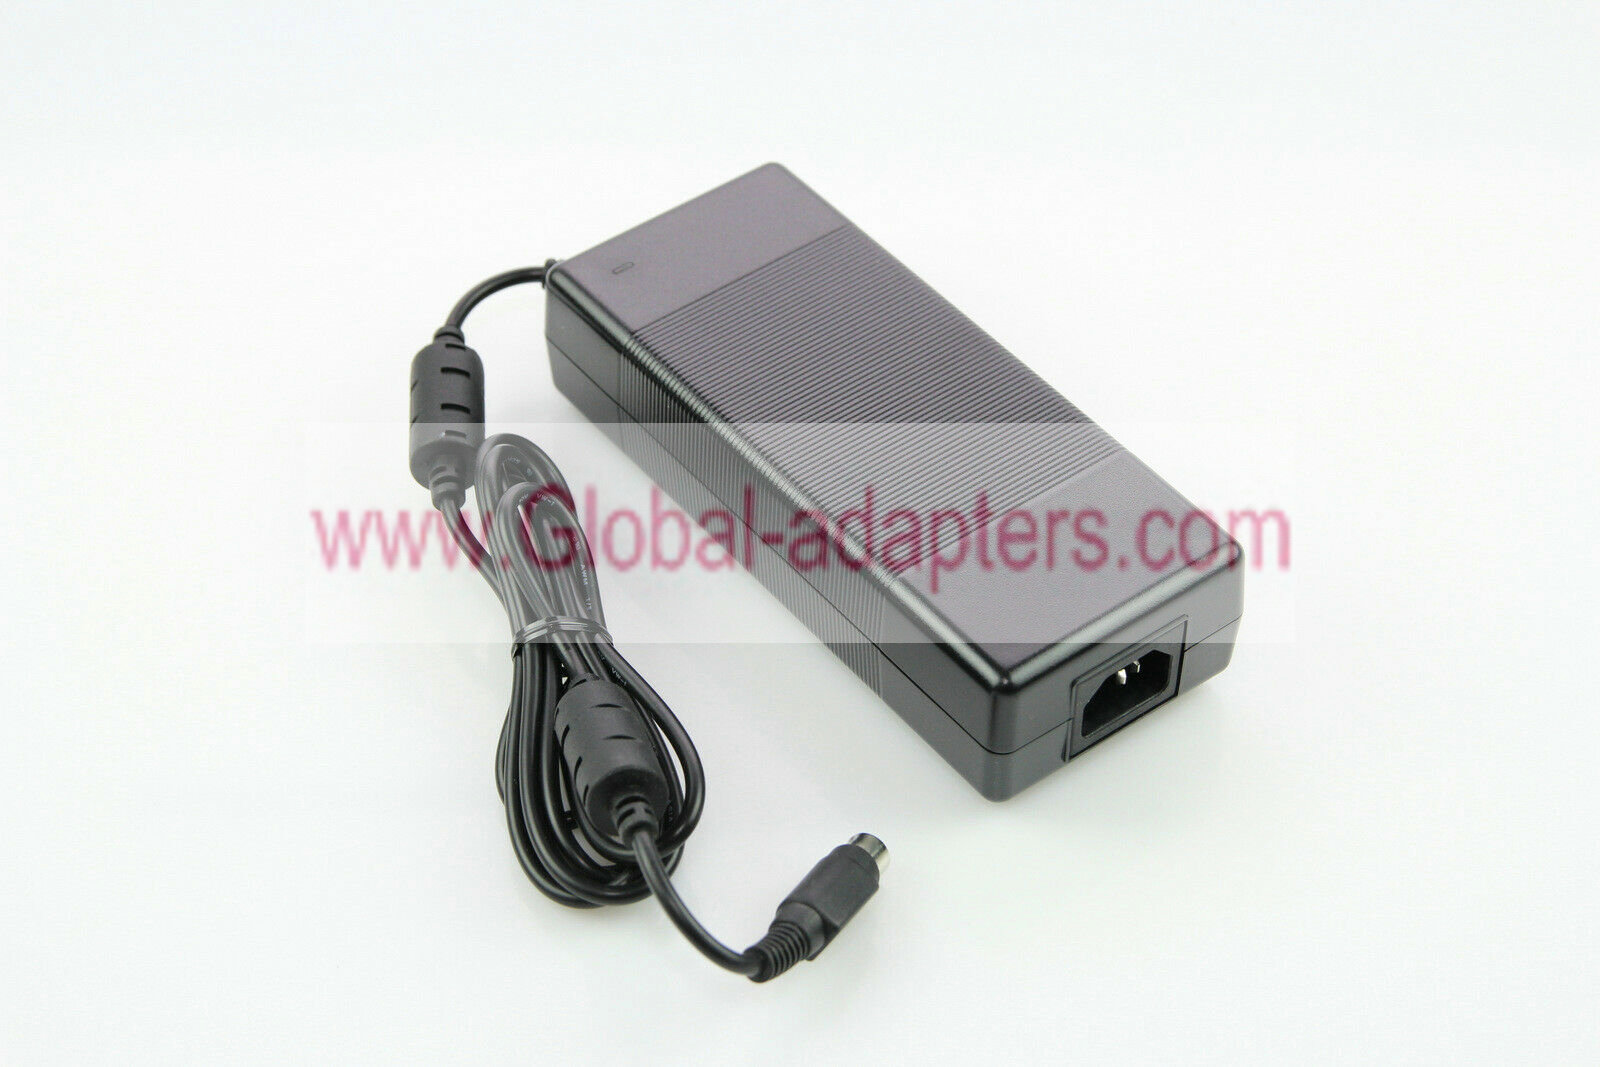 NEW FSP 19VDC 7.89A AC DC Adapter For FSP FSP150-ABAN1 9NA1501600 Power Supply 4-Pin